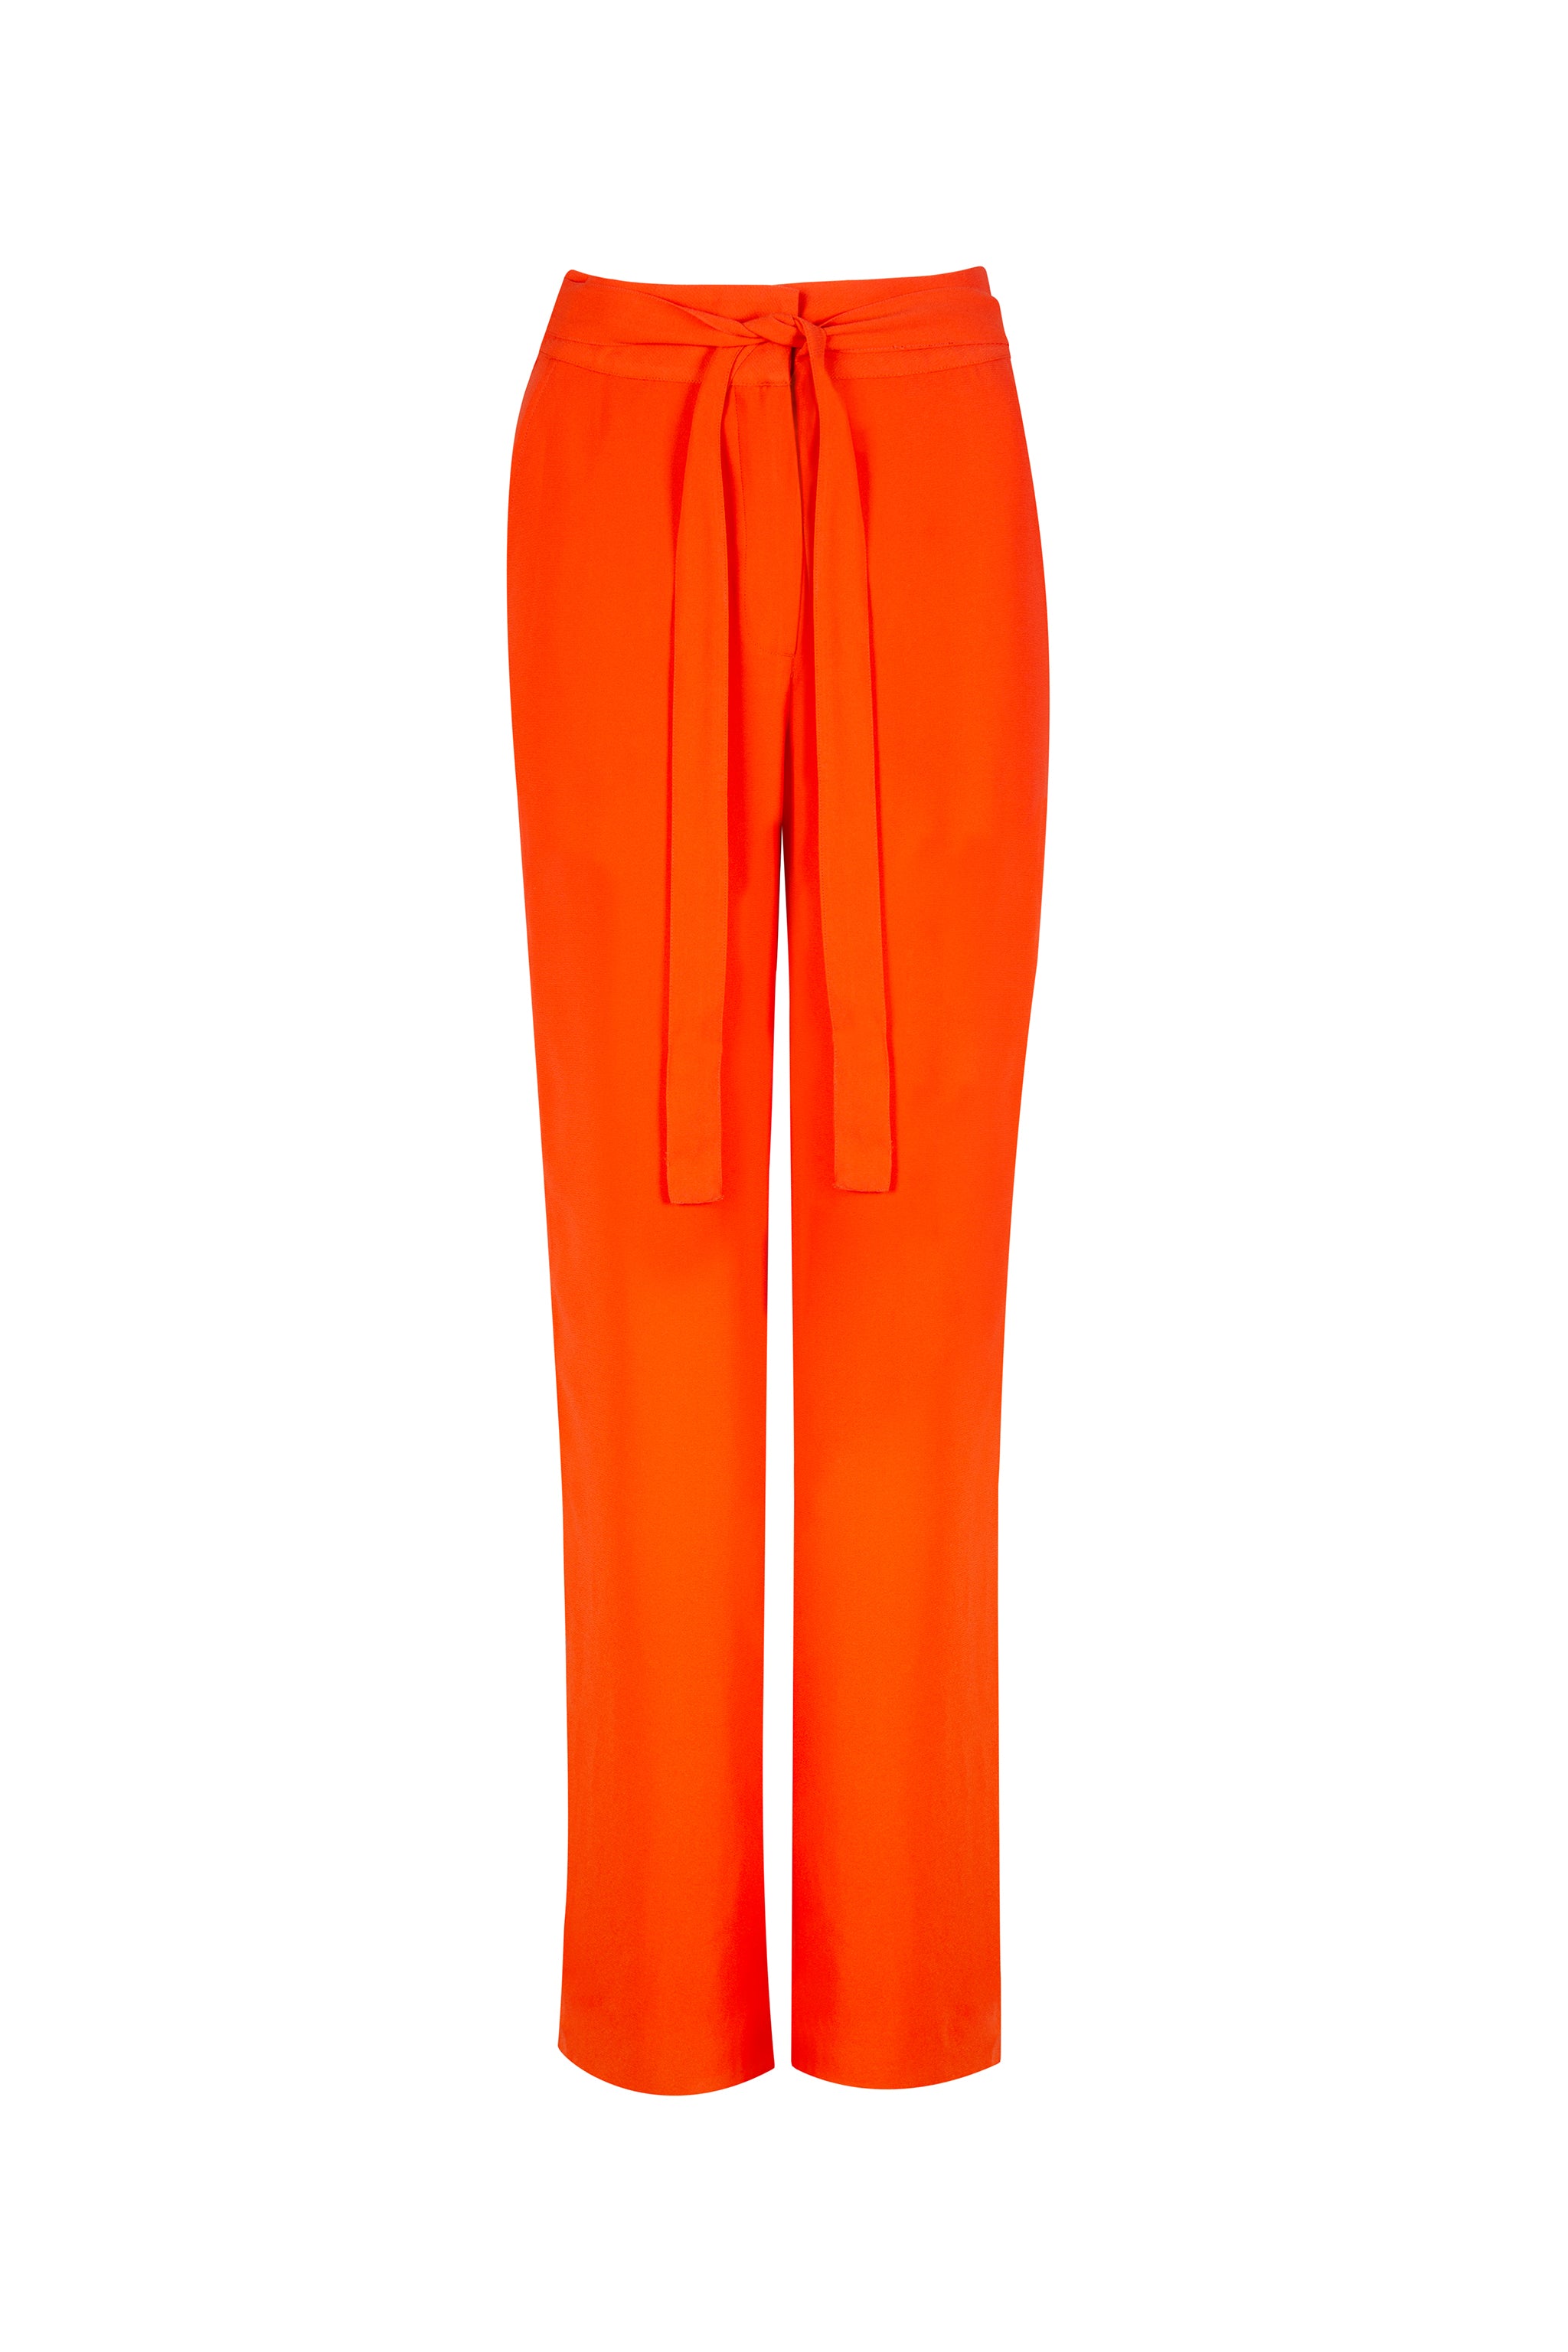 Orange summer trouser with tied belt and pockets